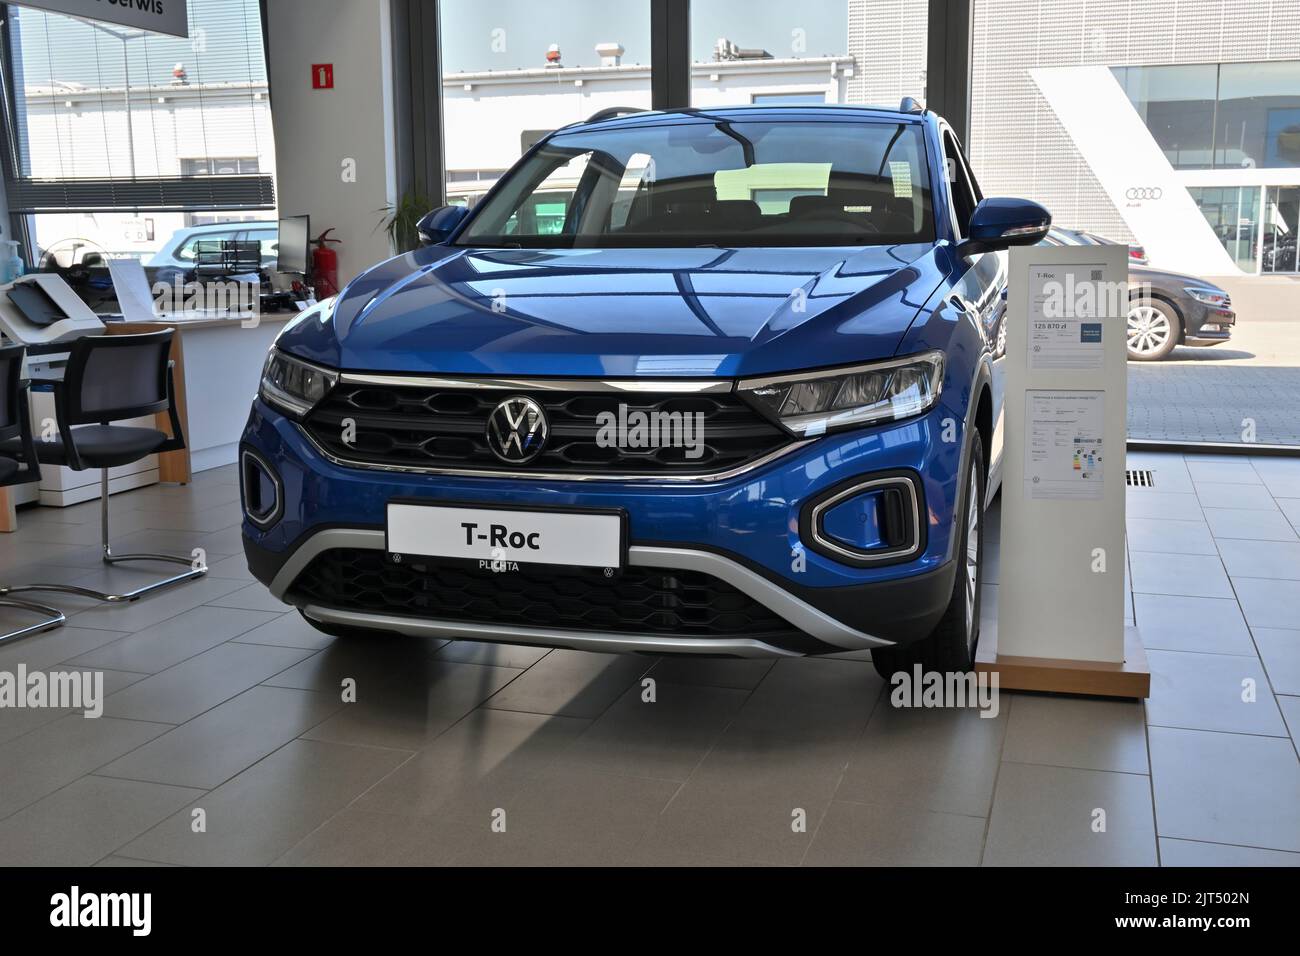 Gdansk, Poland - August 27, 2022: New model of Volkswagen T-Roc presented in the car showroom of Gdansk Stock Photo